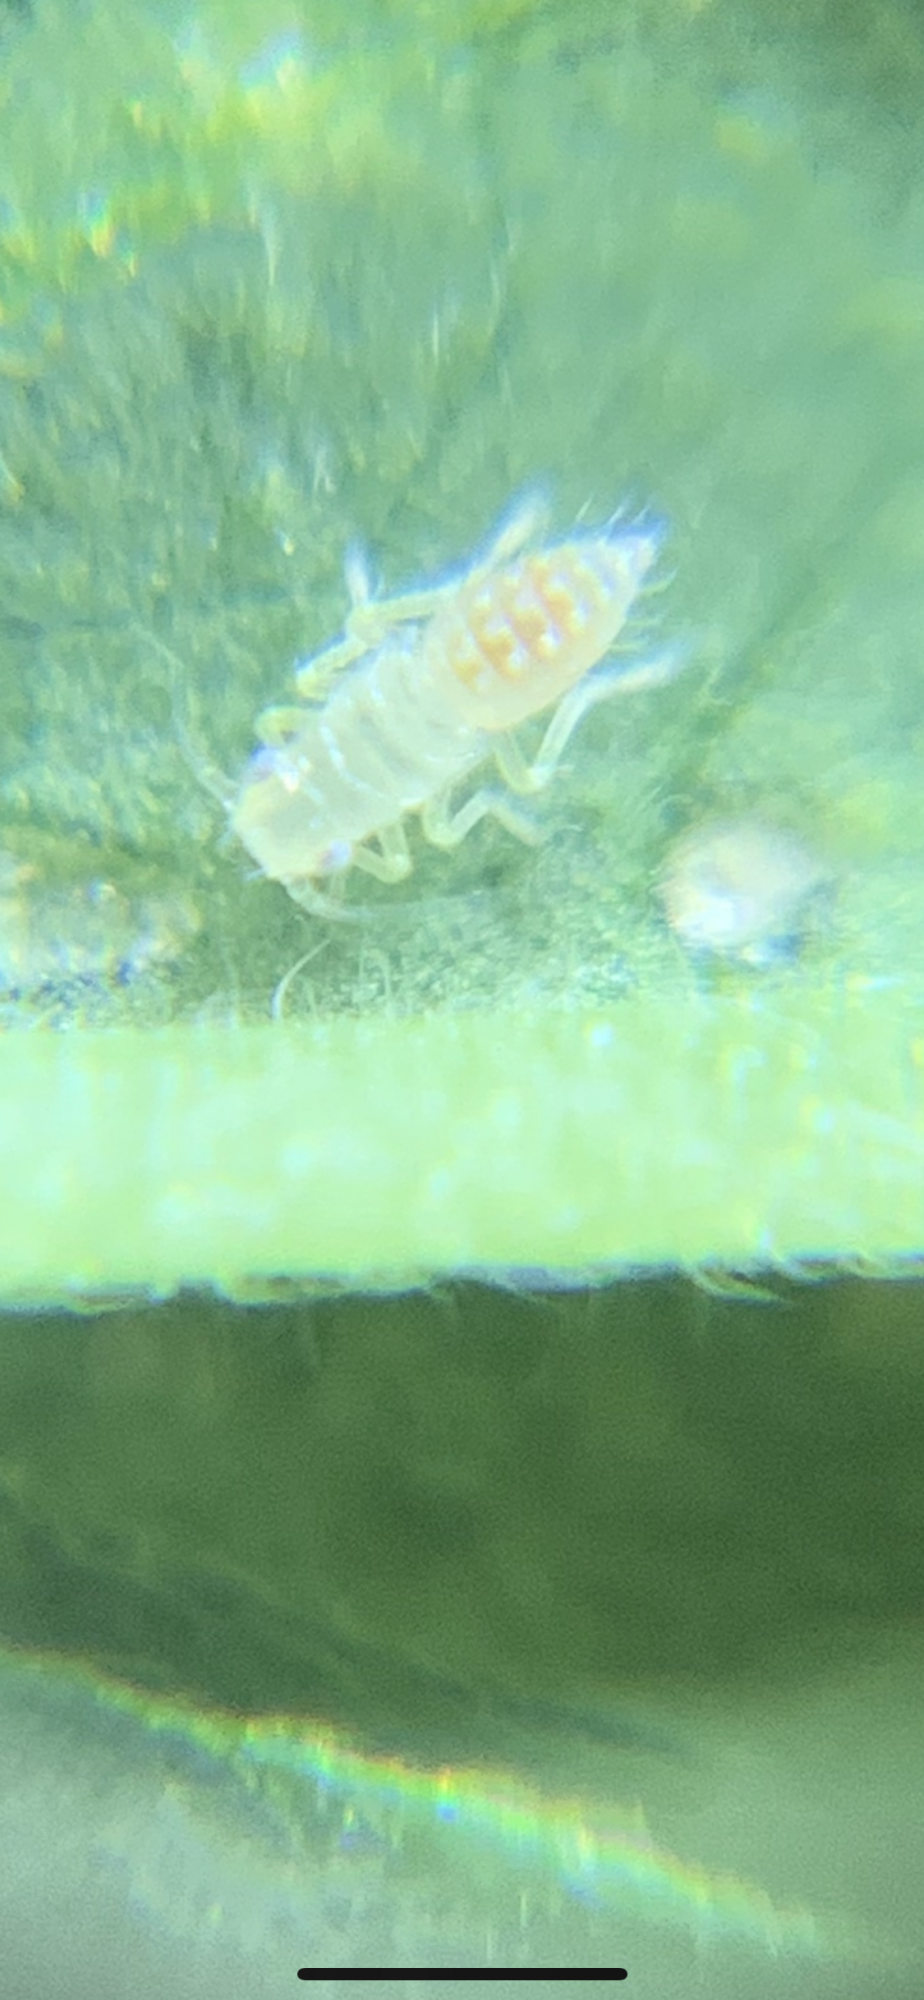 Need some help with bug identification 5